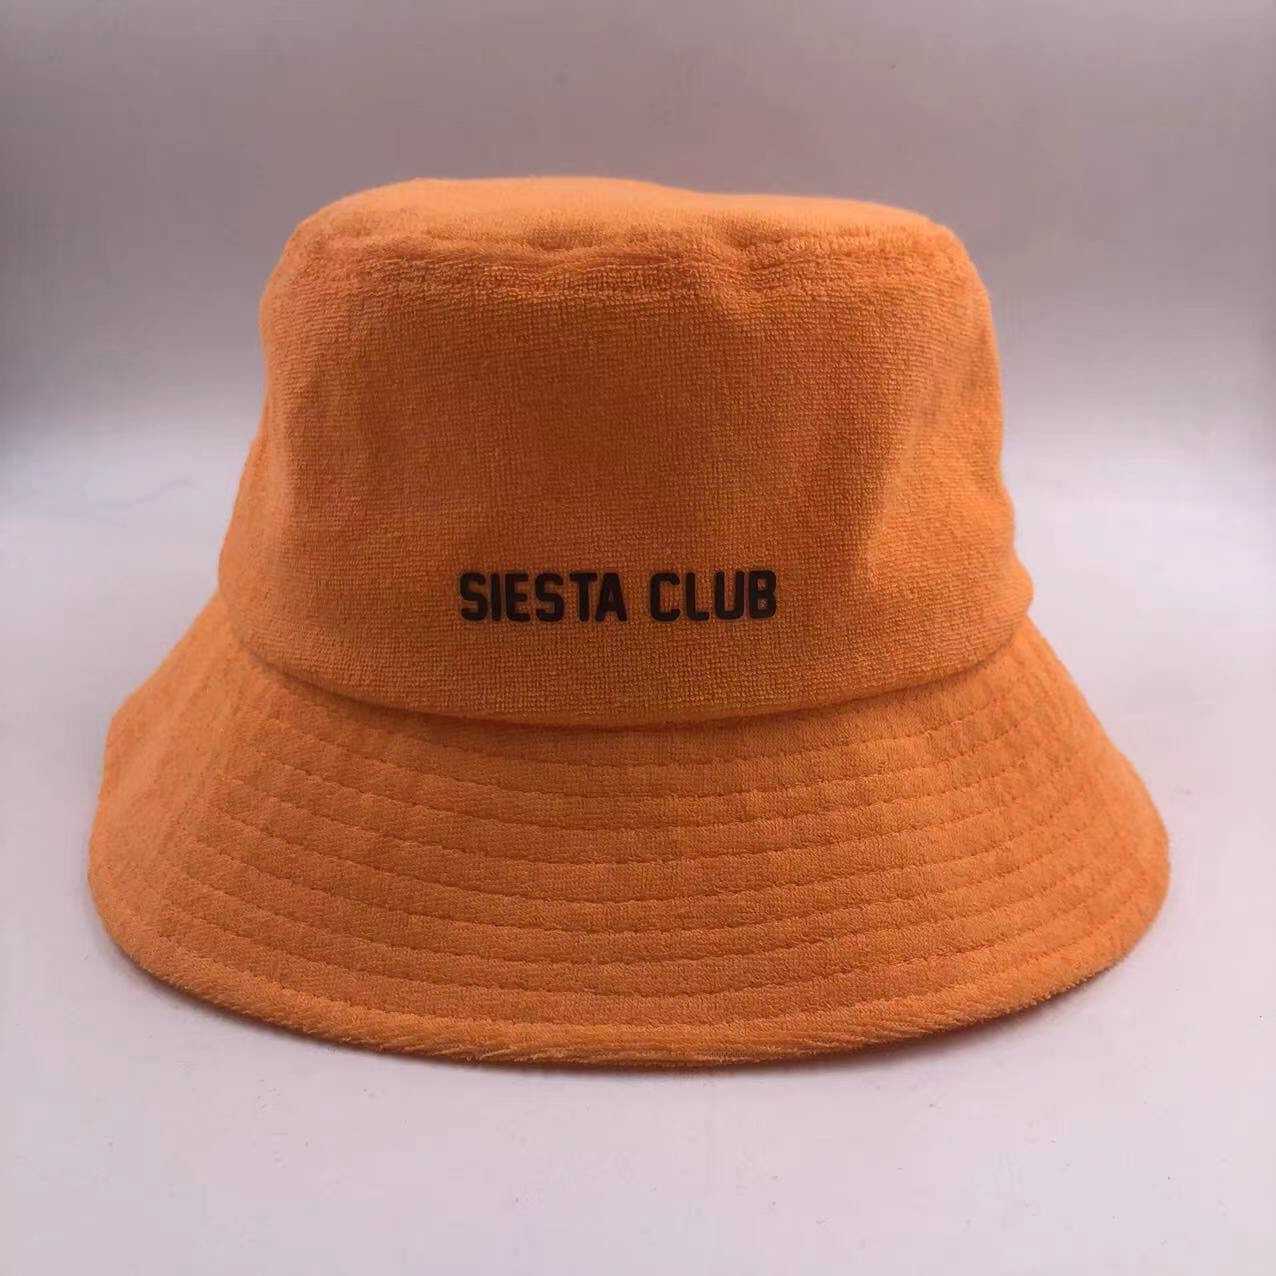 an orange hat with black text